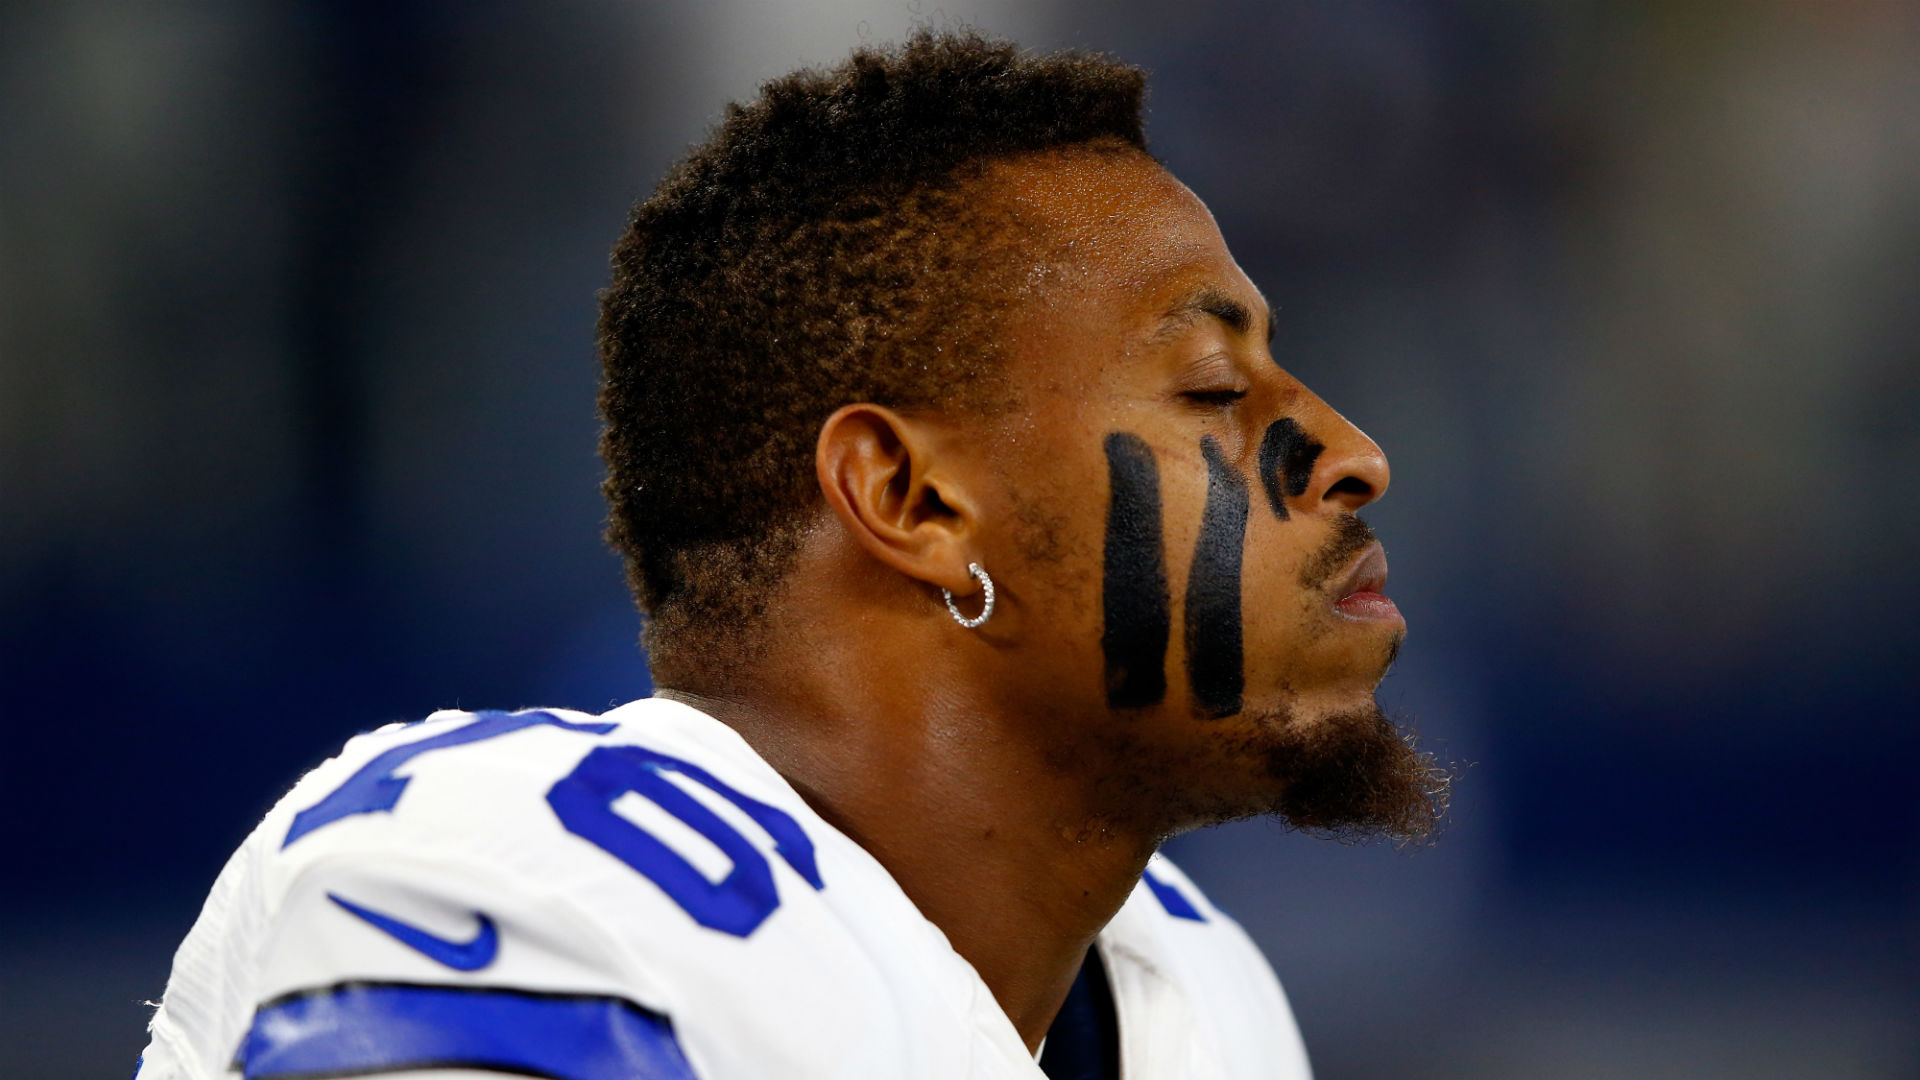 Greg Hardy signs with arena football team, continuing MMA career